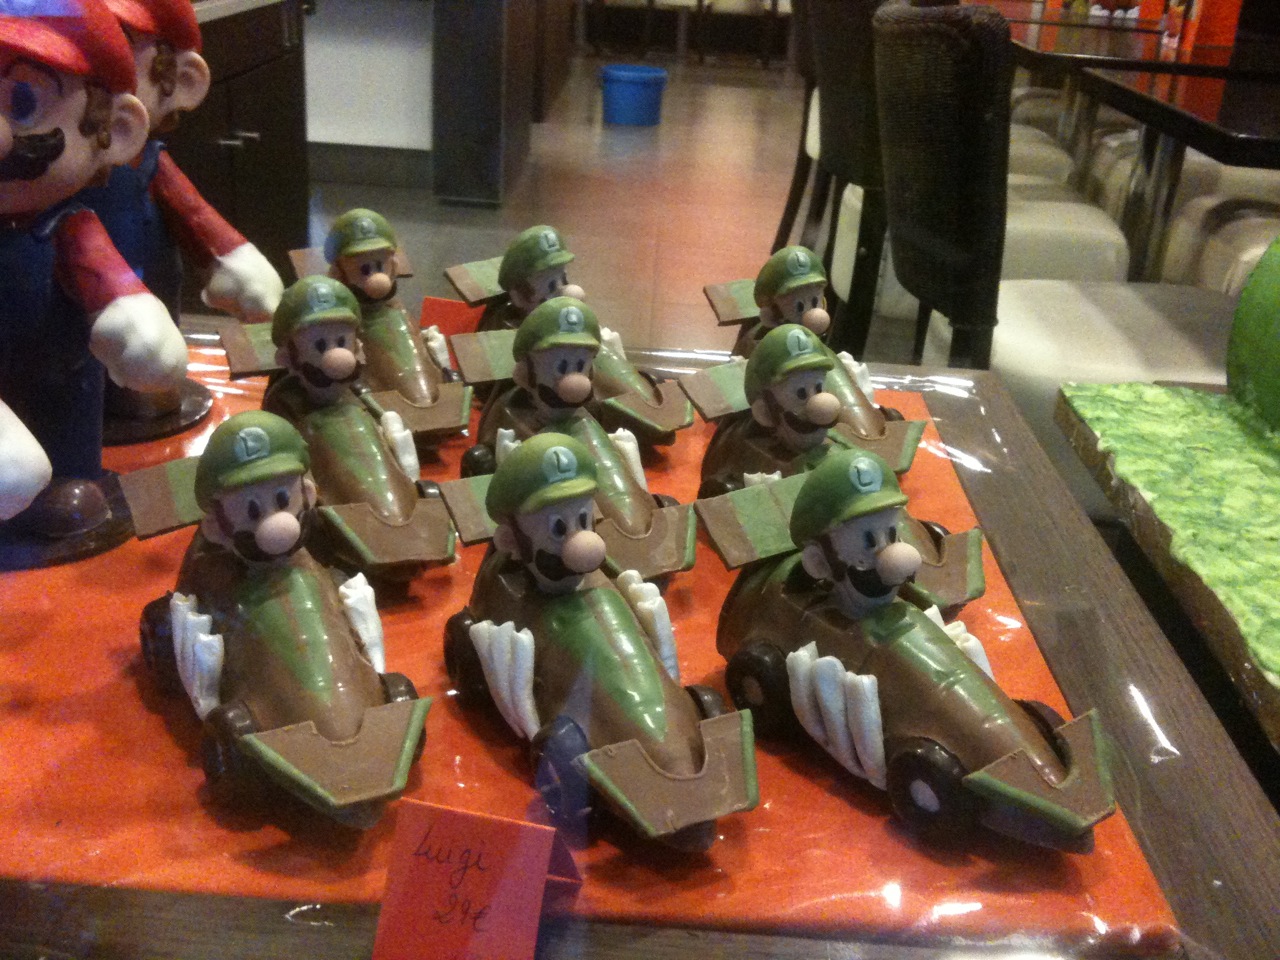 Mario Kart Made Out Of Chocolate